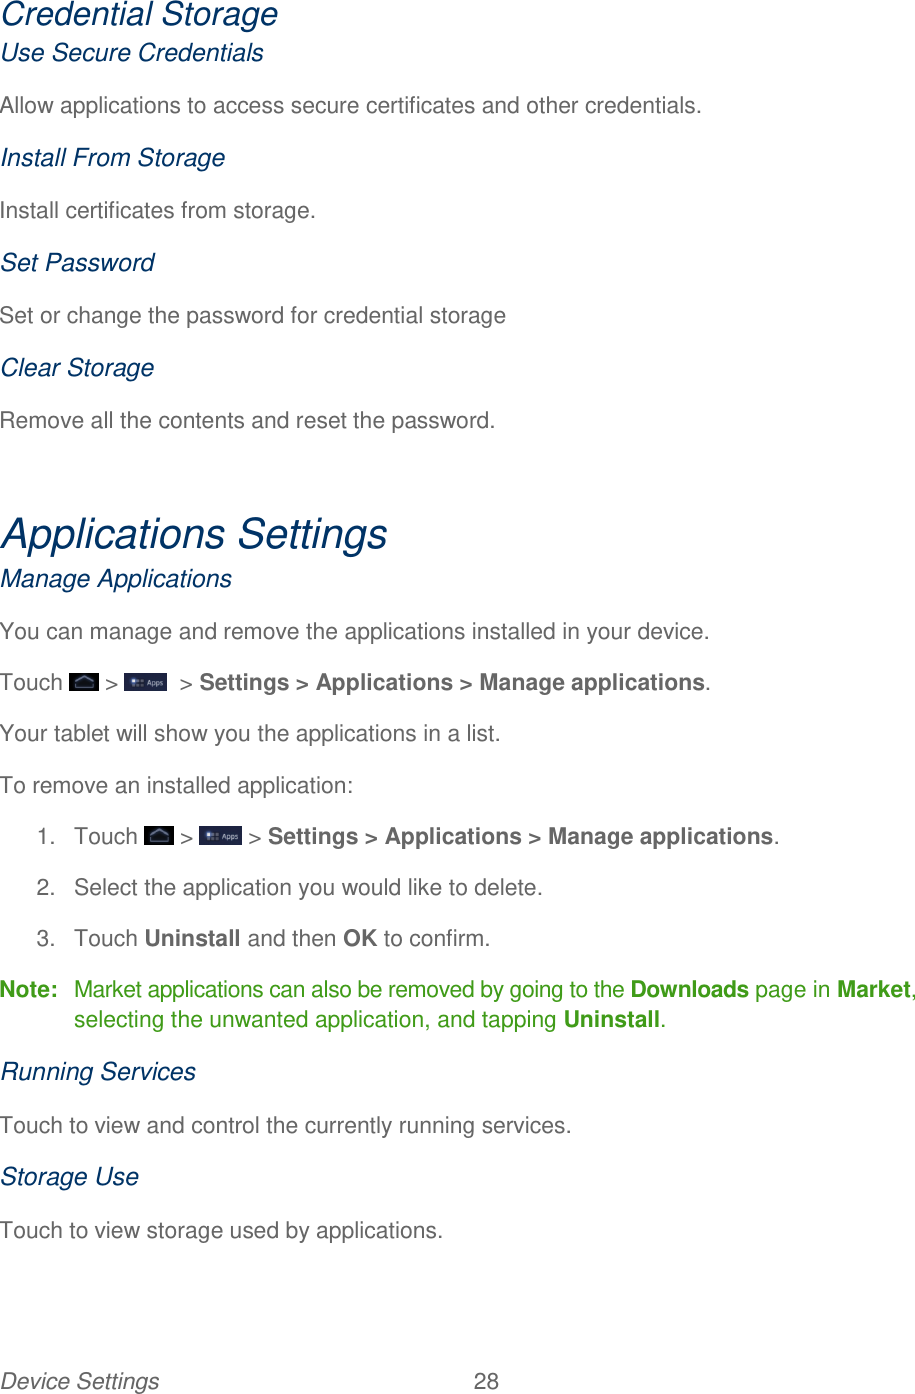 Device Settings  28   Credential Storage Use Secure Credentials Allow applications to access secure certificates and other credentials. Install From Storage Install certificates from storage. Set Password Set or change the password for credential storage Clear Storage Remove all the contents and reset the password.  Applications Settings Manage Applications You can manage and remove the applications installed in your device. Touch   &gt;    &gt; Settings &gt; Applications &gt; Manage applications. Your tablet will show you the applications in a list. To remove an installed application: 1.  Touch   &gt;   &gt; Settings &gt; Applications &gt; Manage applications. 2.  Select the application you would like to delete. 3.  Touch Uninstall and then OK to confirm. Note:  Market applications can also be removed by going to the Downloads page in Market, selecting the unwanted application, and tapping Uninstall. Running Services Touch to view and control the currently running services. Storage Use Touch to view storage used by applications. 